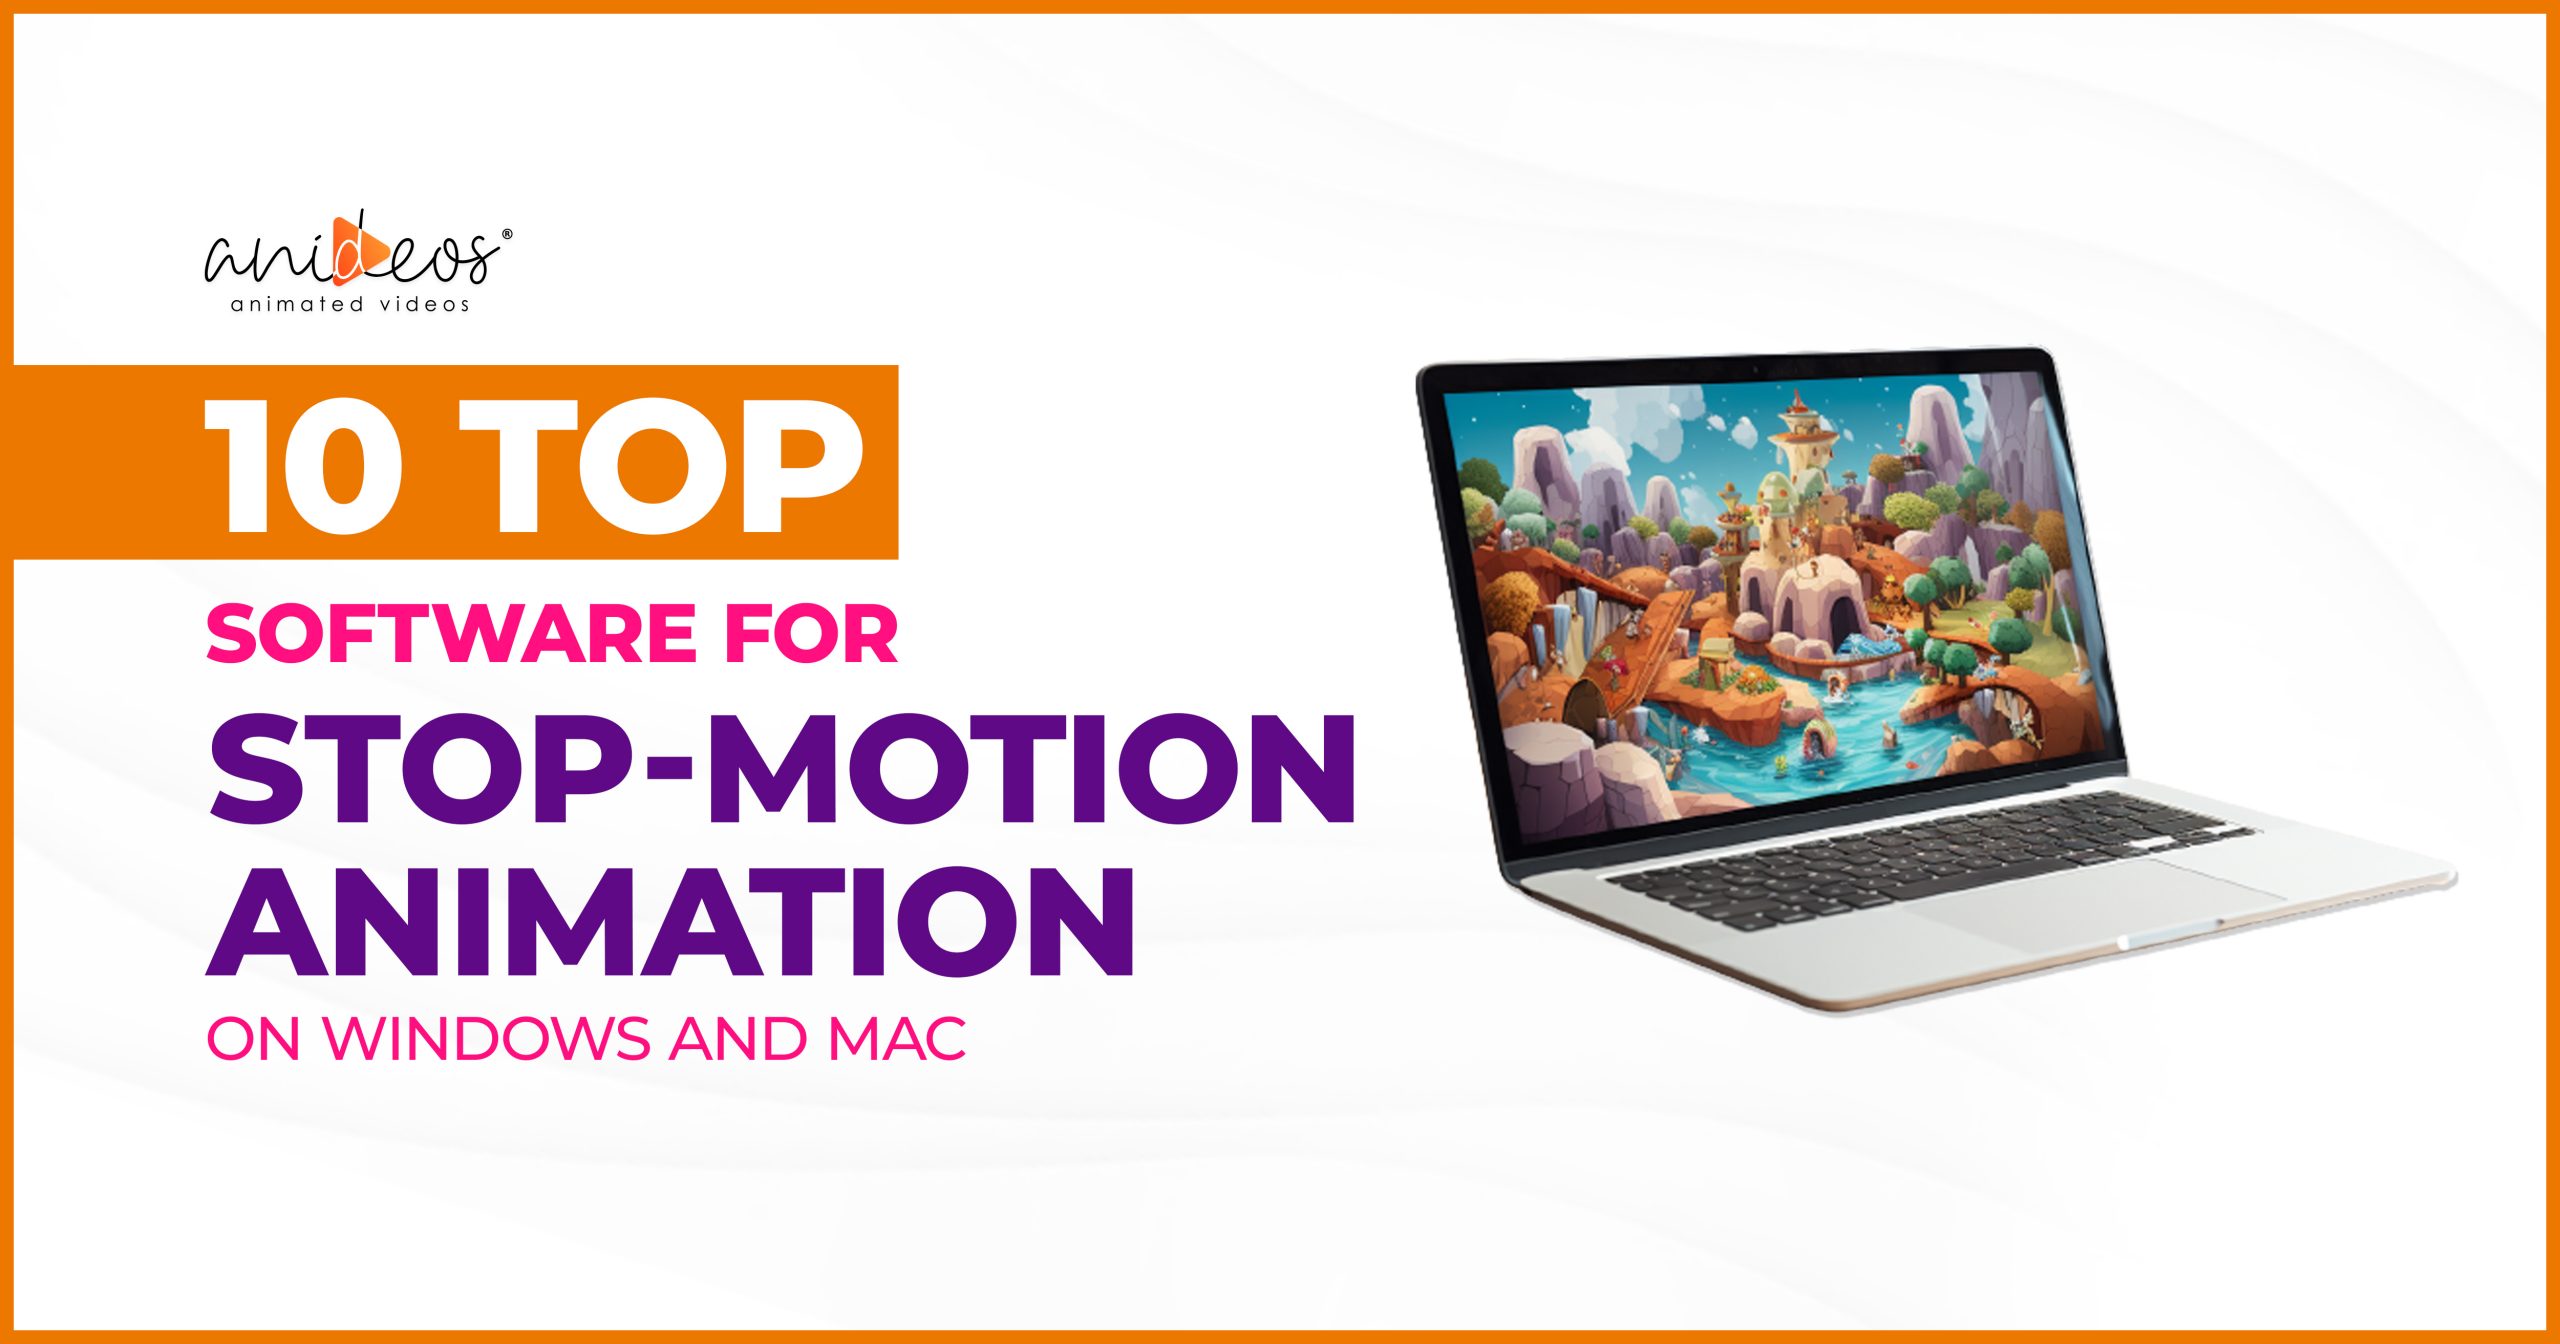 10 Top Software for Fun Stop-Motion Animation on Windows and Mac